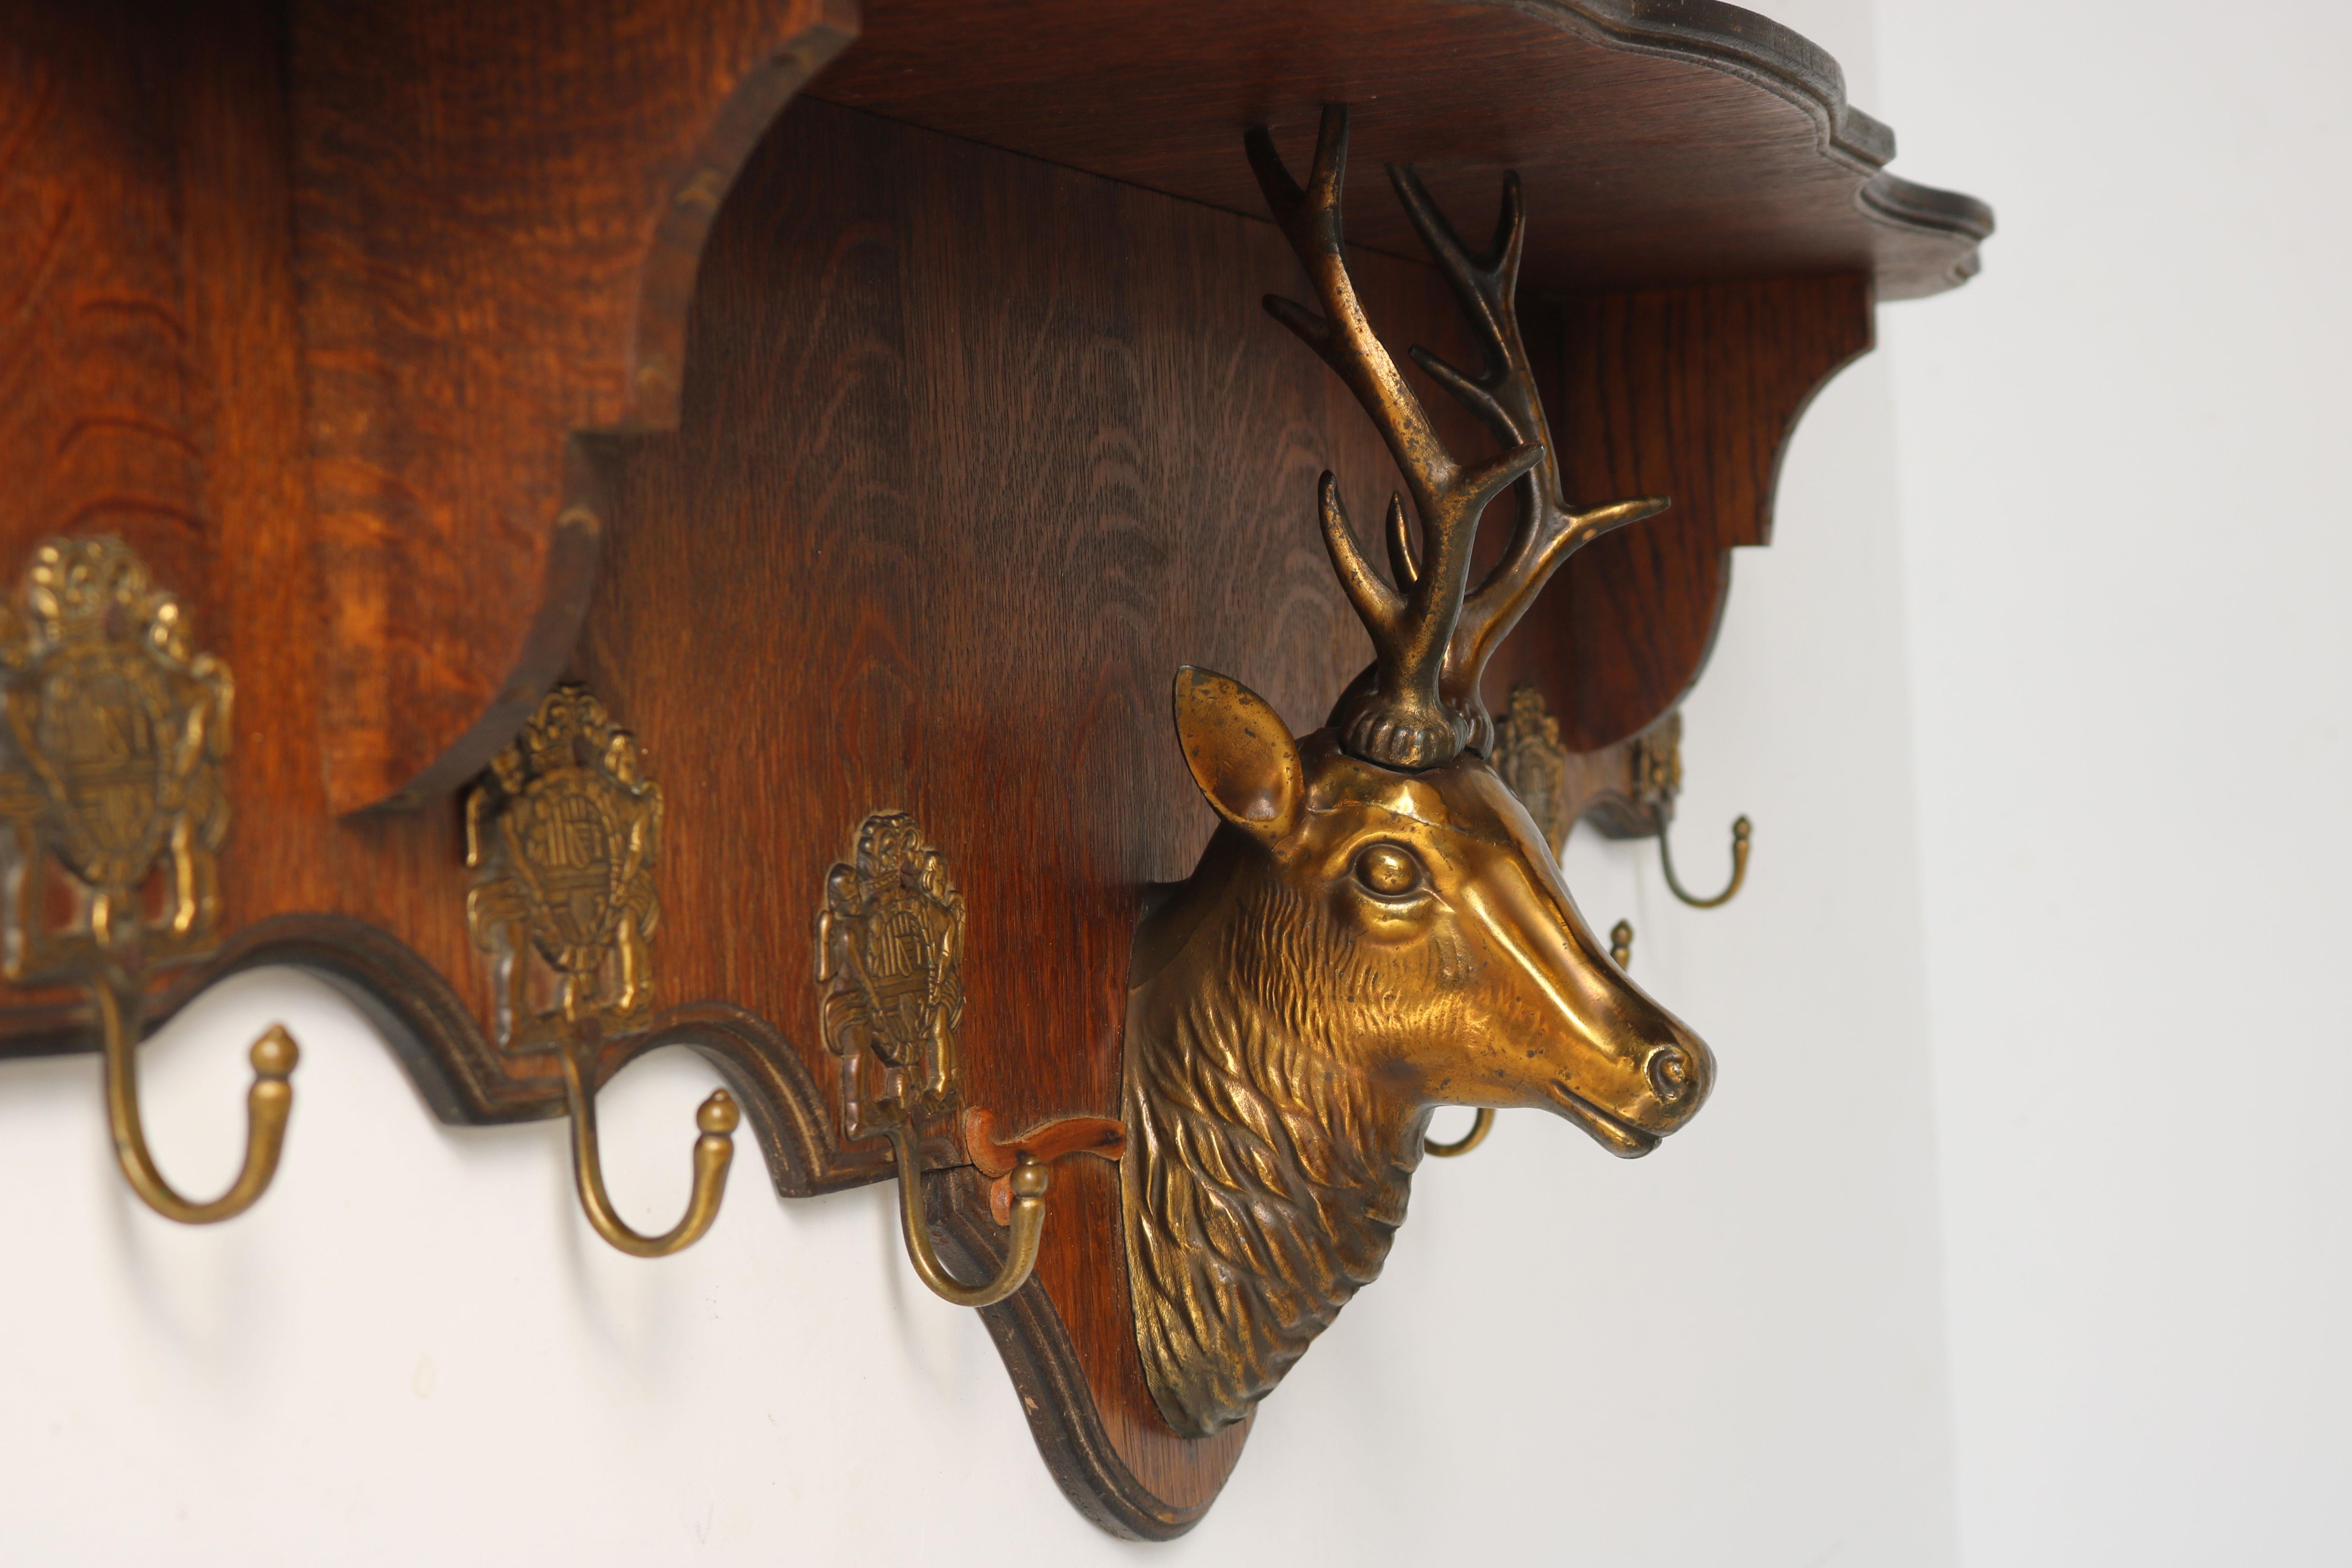 Mid-20th Century Antique French Coat Rack with Brass Deer Head 1940 Carved Oak Hat Rack Hallway